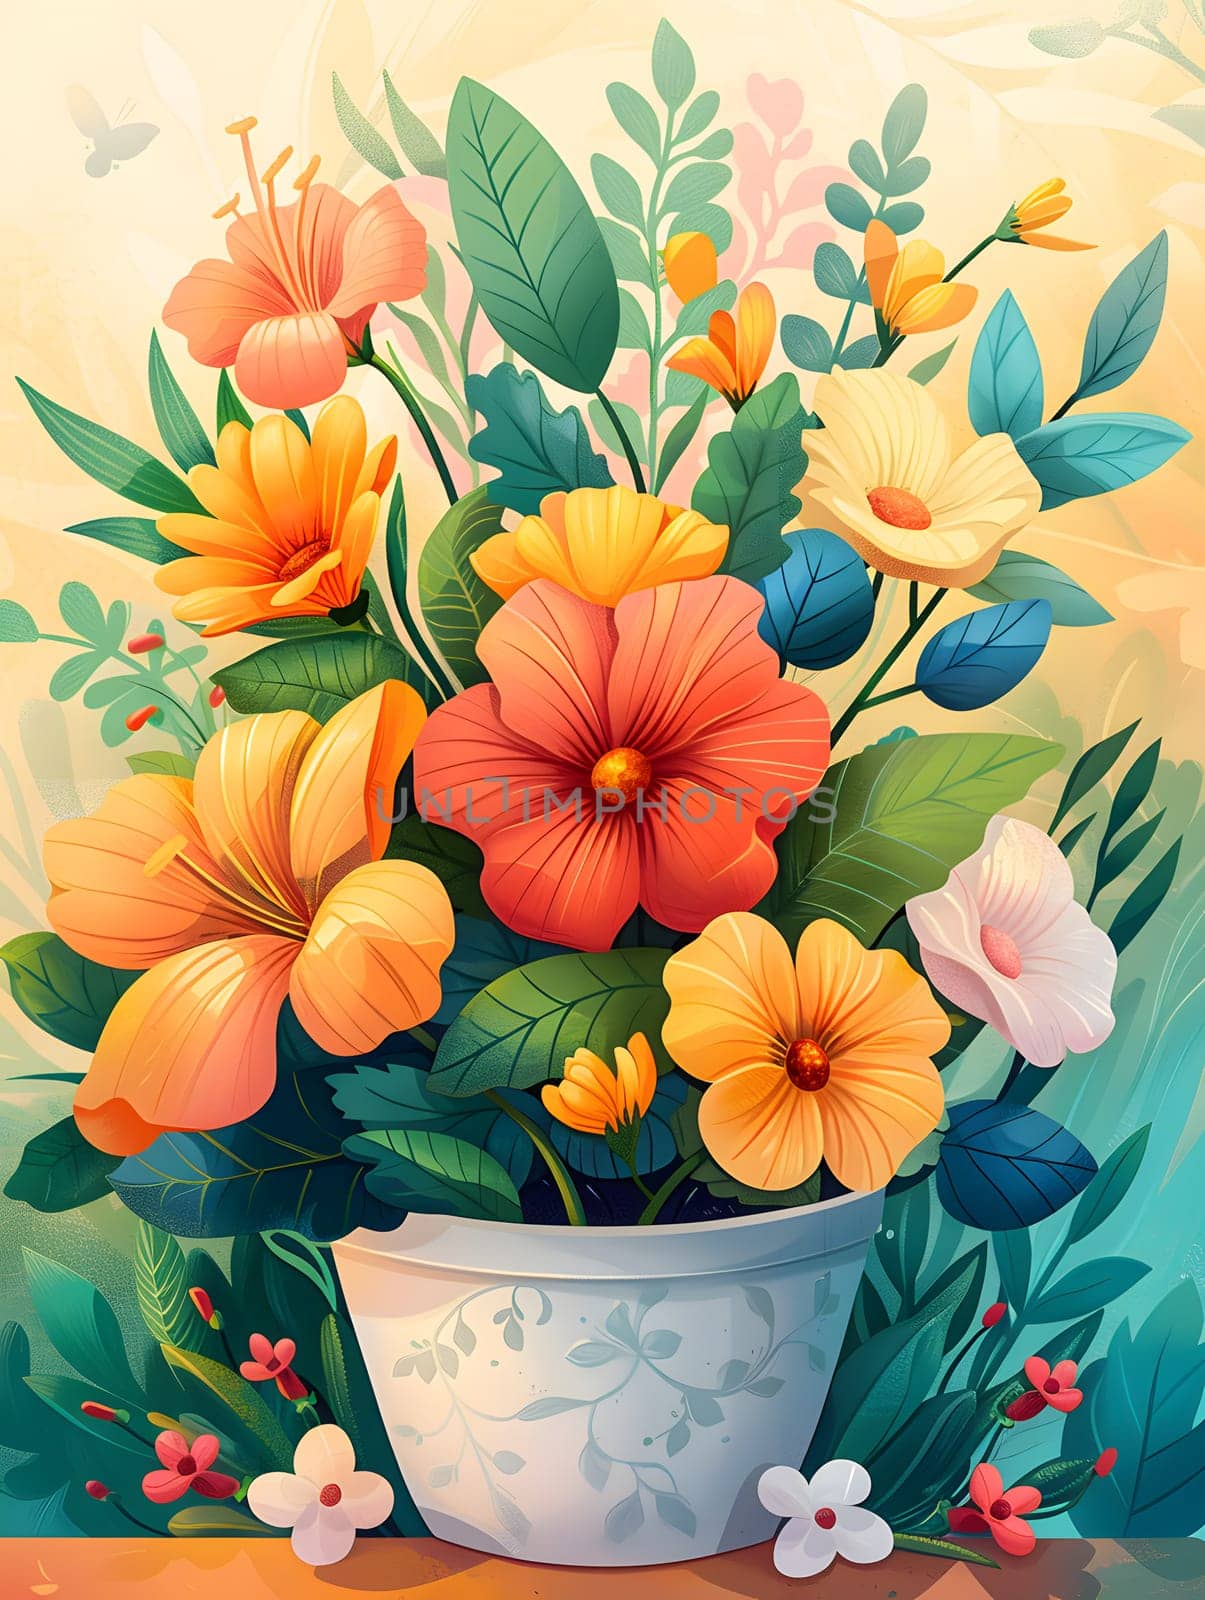 A beautiful painting depicting a flowerfilled vase on a table, showcasing the artists creativity in flower arranging